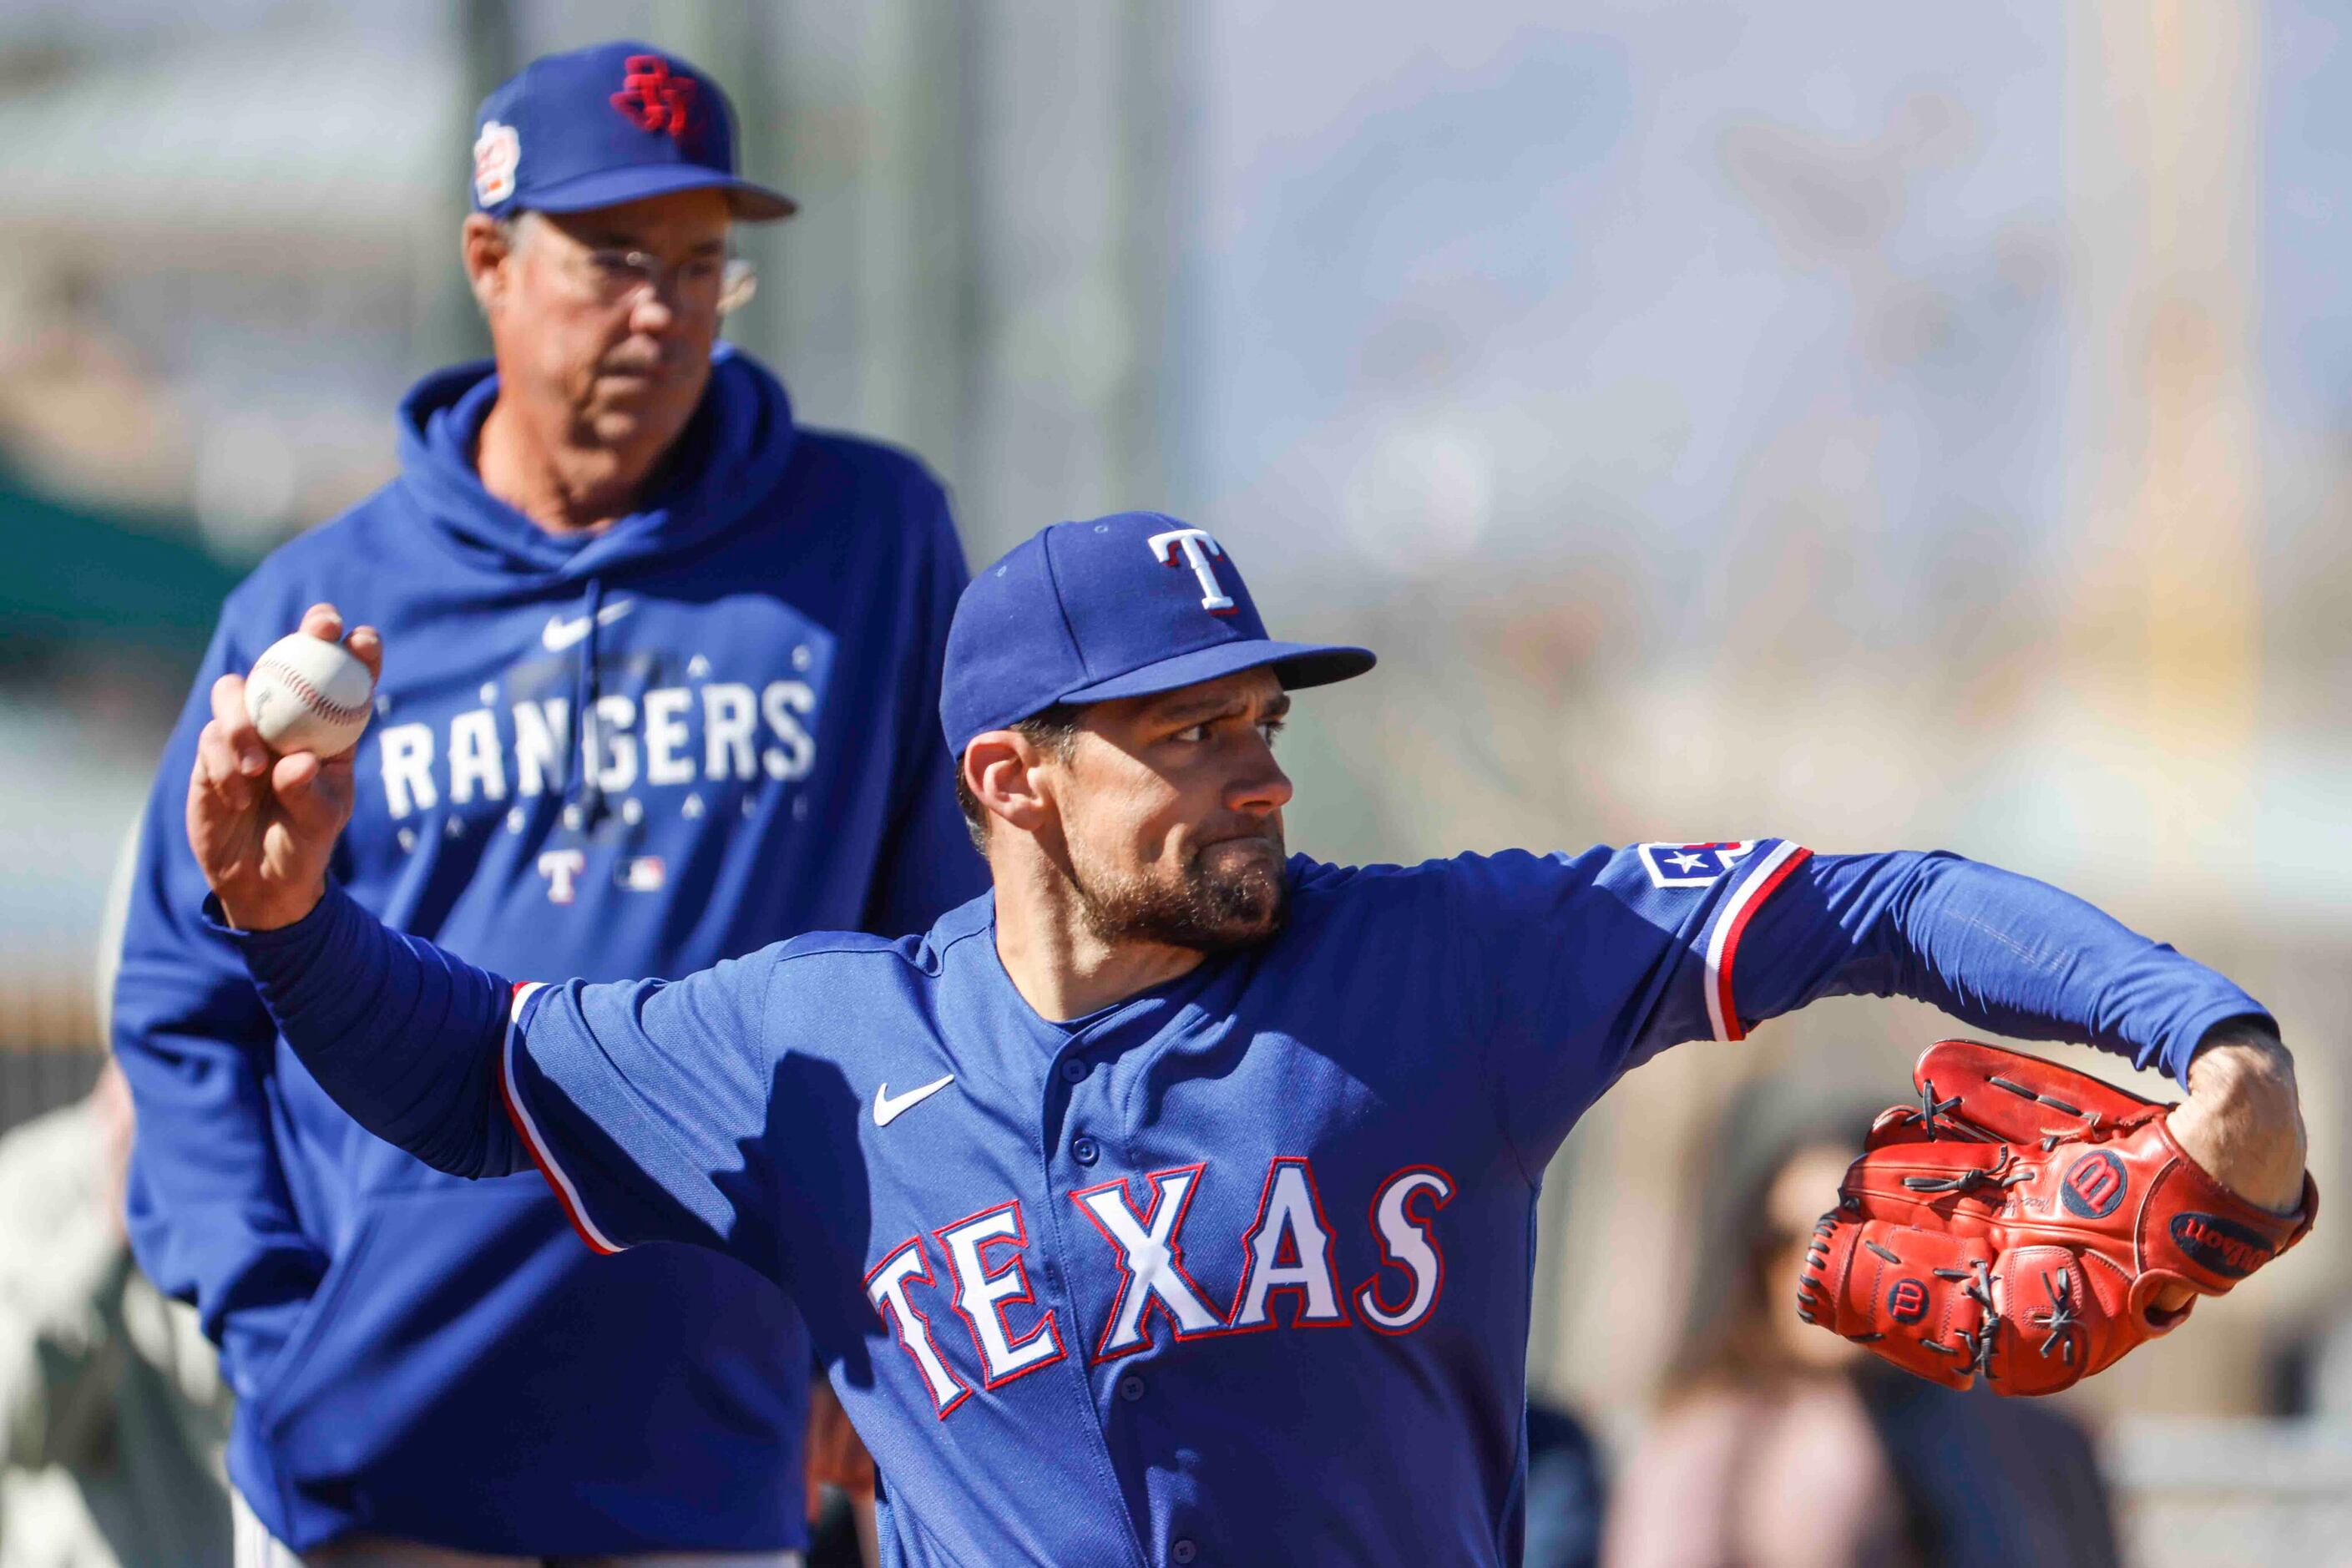 The Texas Rangers Remain the Last Holdouts in MLB in Celebrating